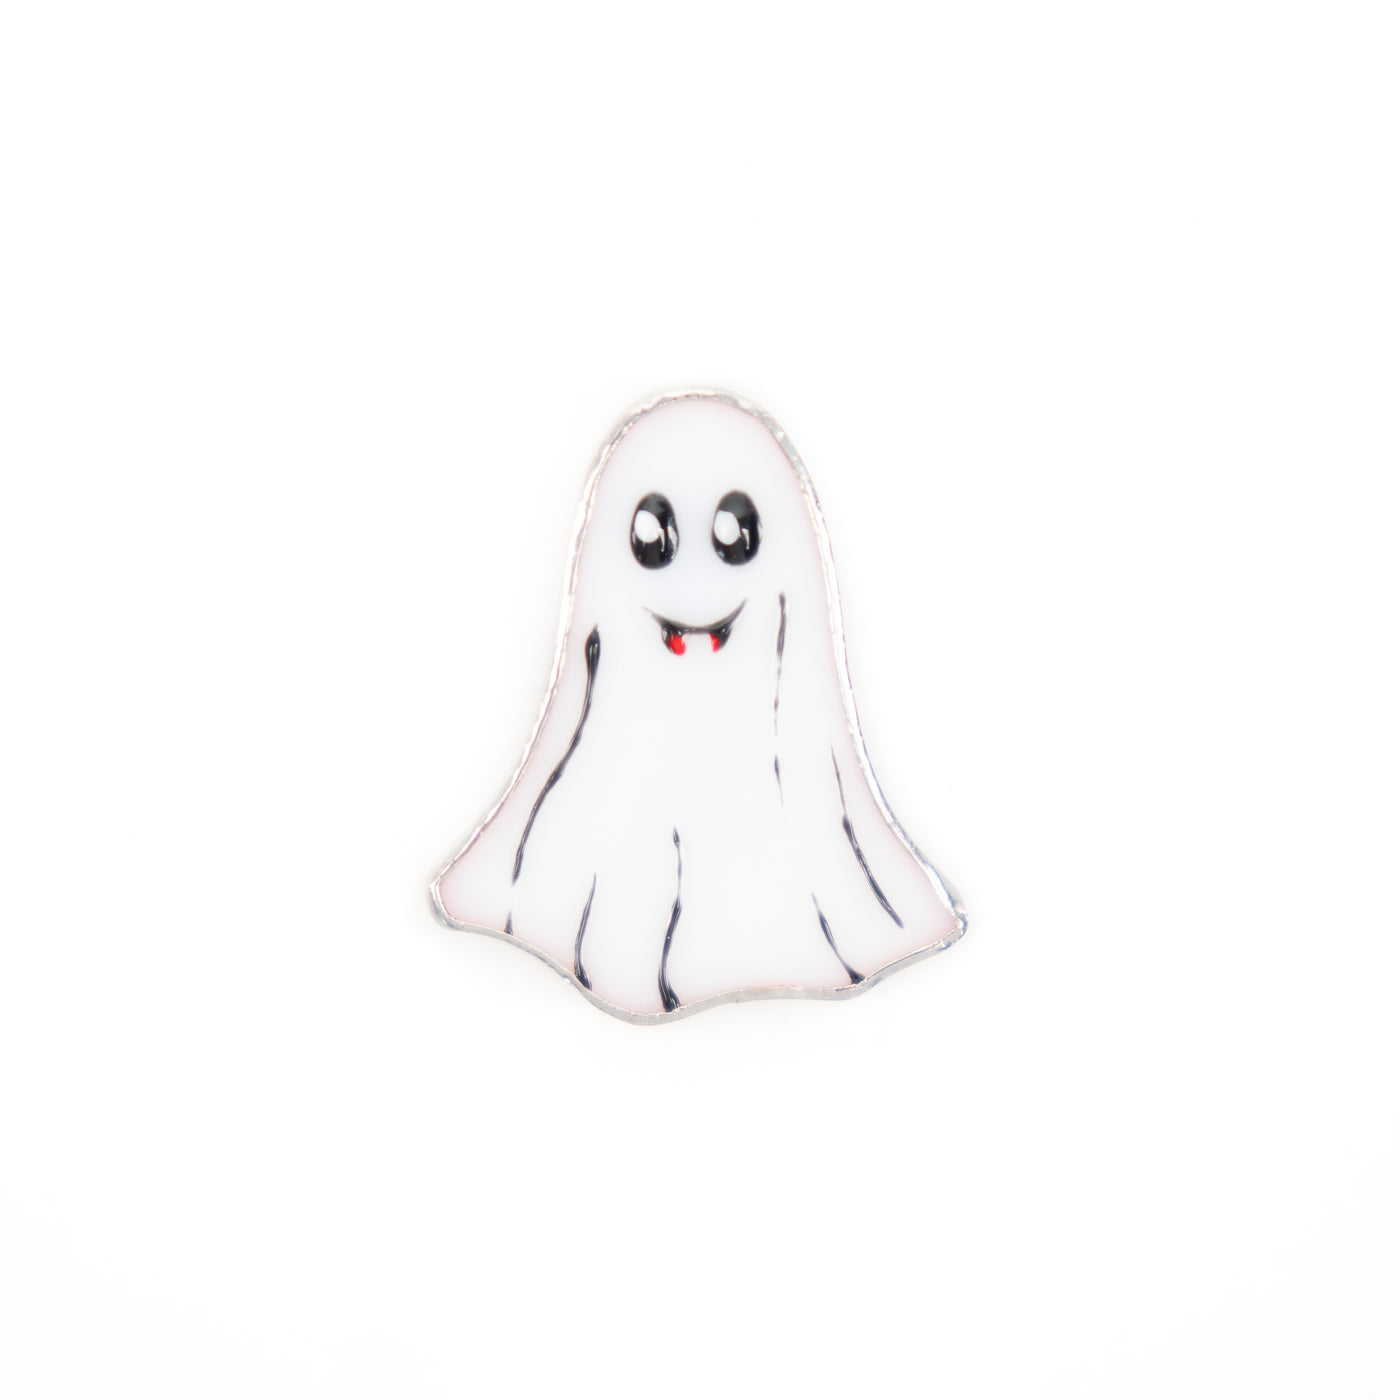 Stained glass happy ghost pin for Halloween 